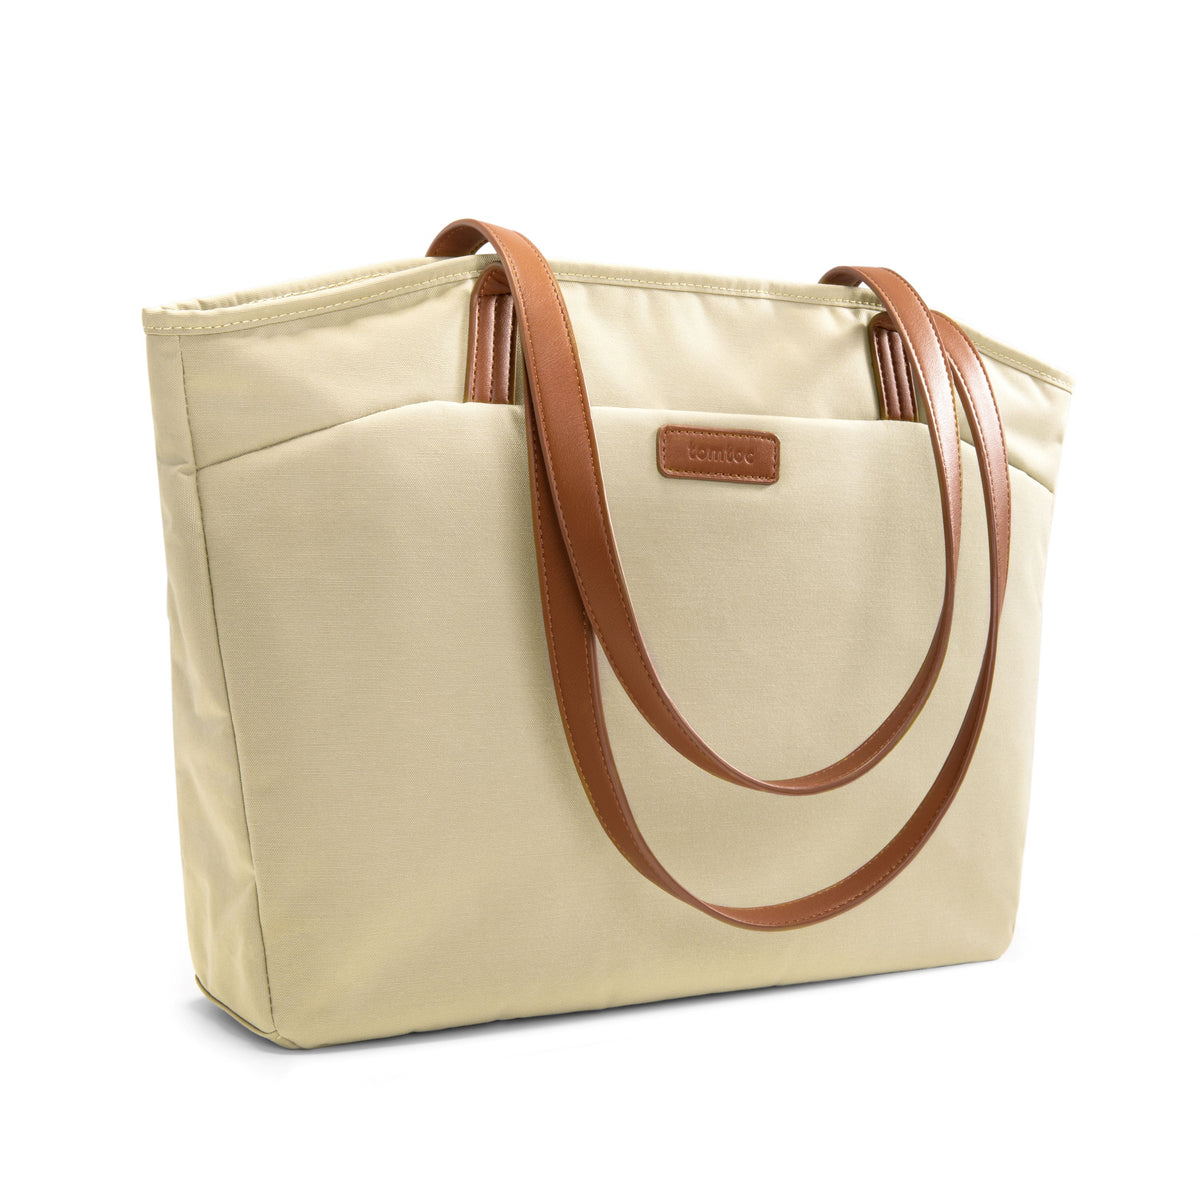 TheHer-T23 Laptop Tote Bag Khaki 14-inch